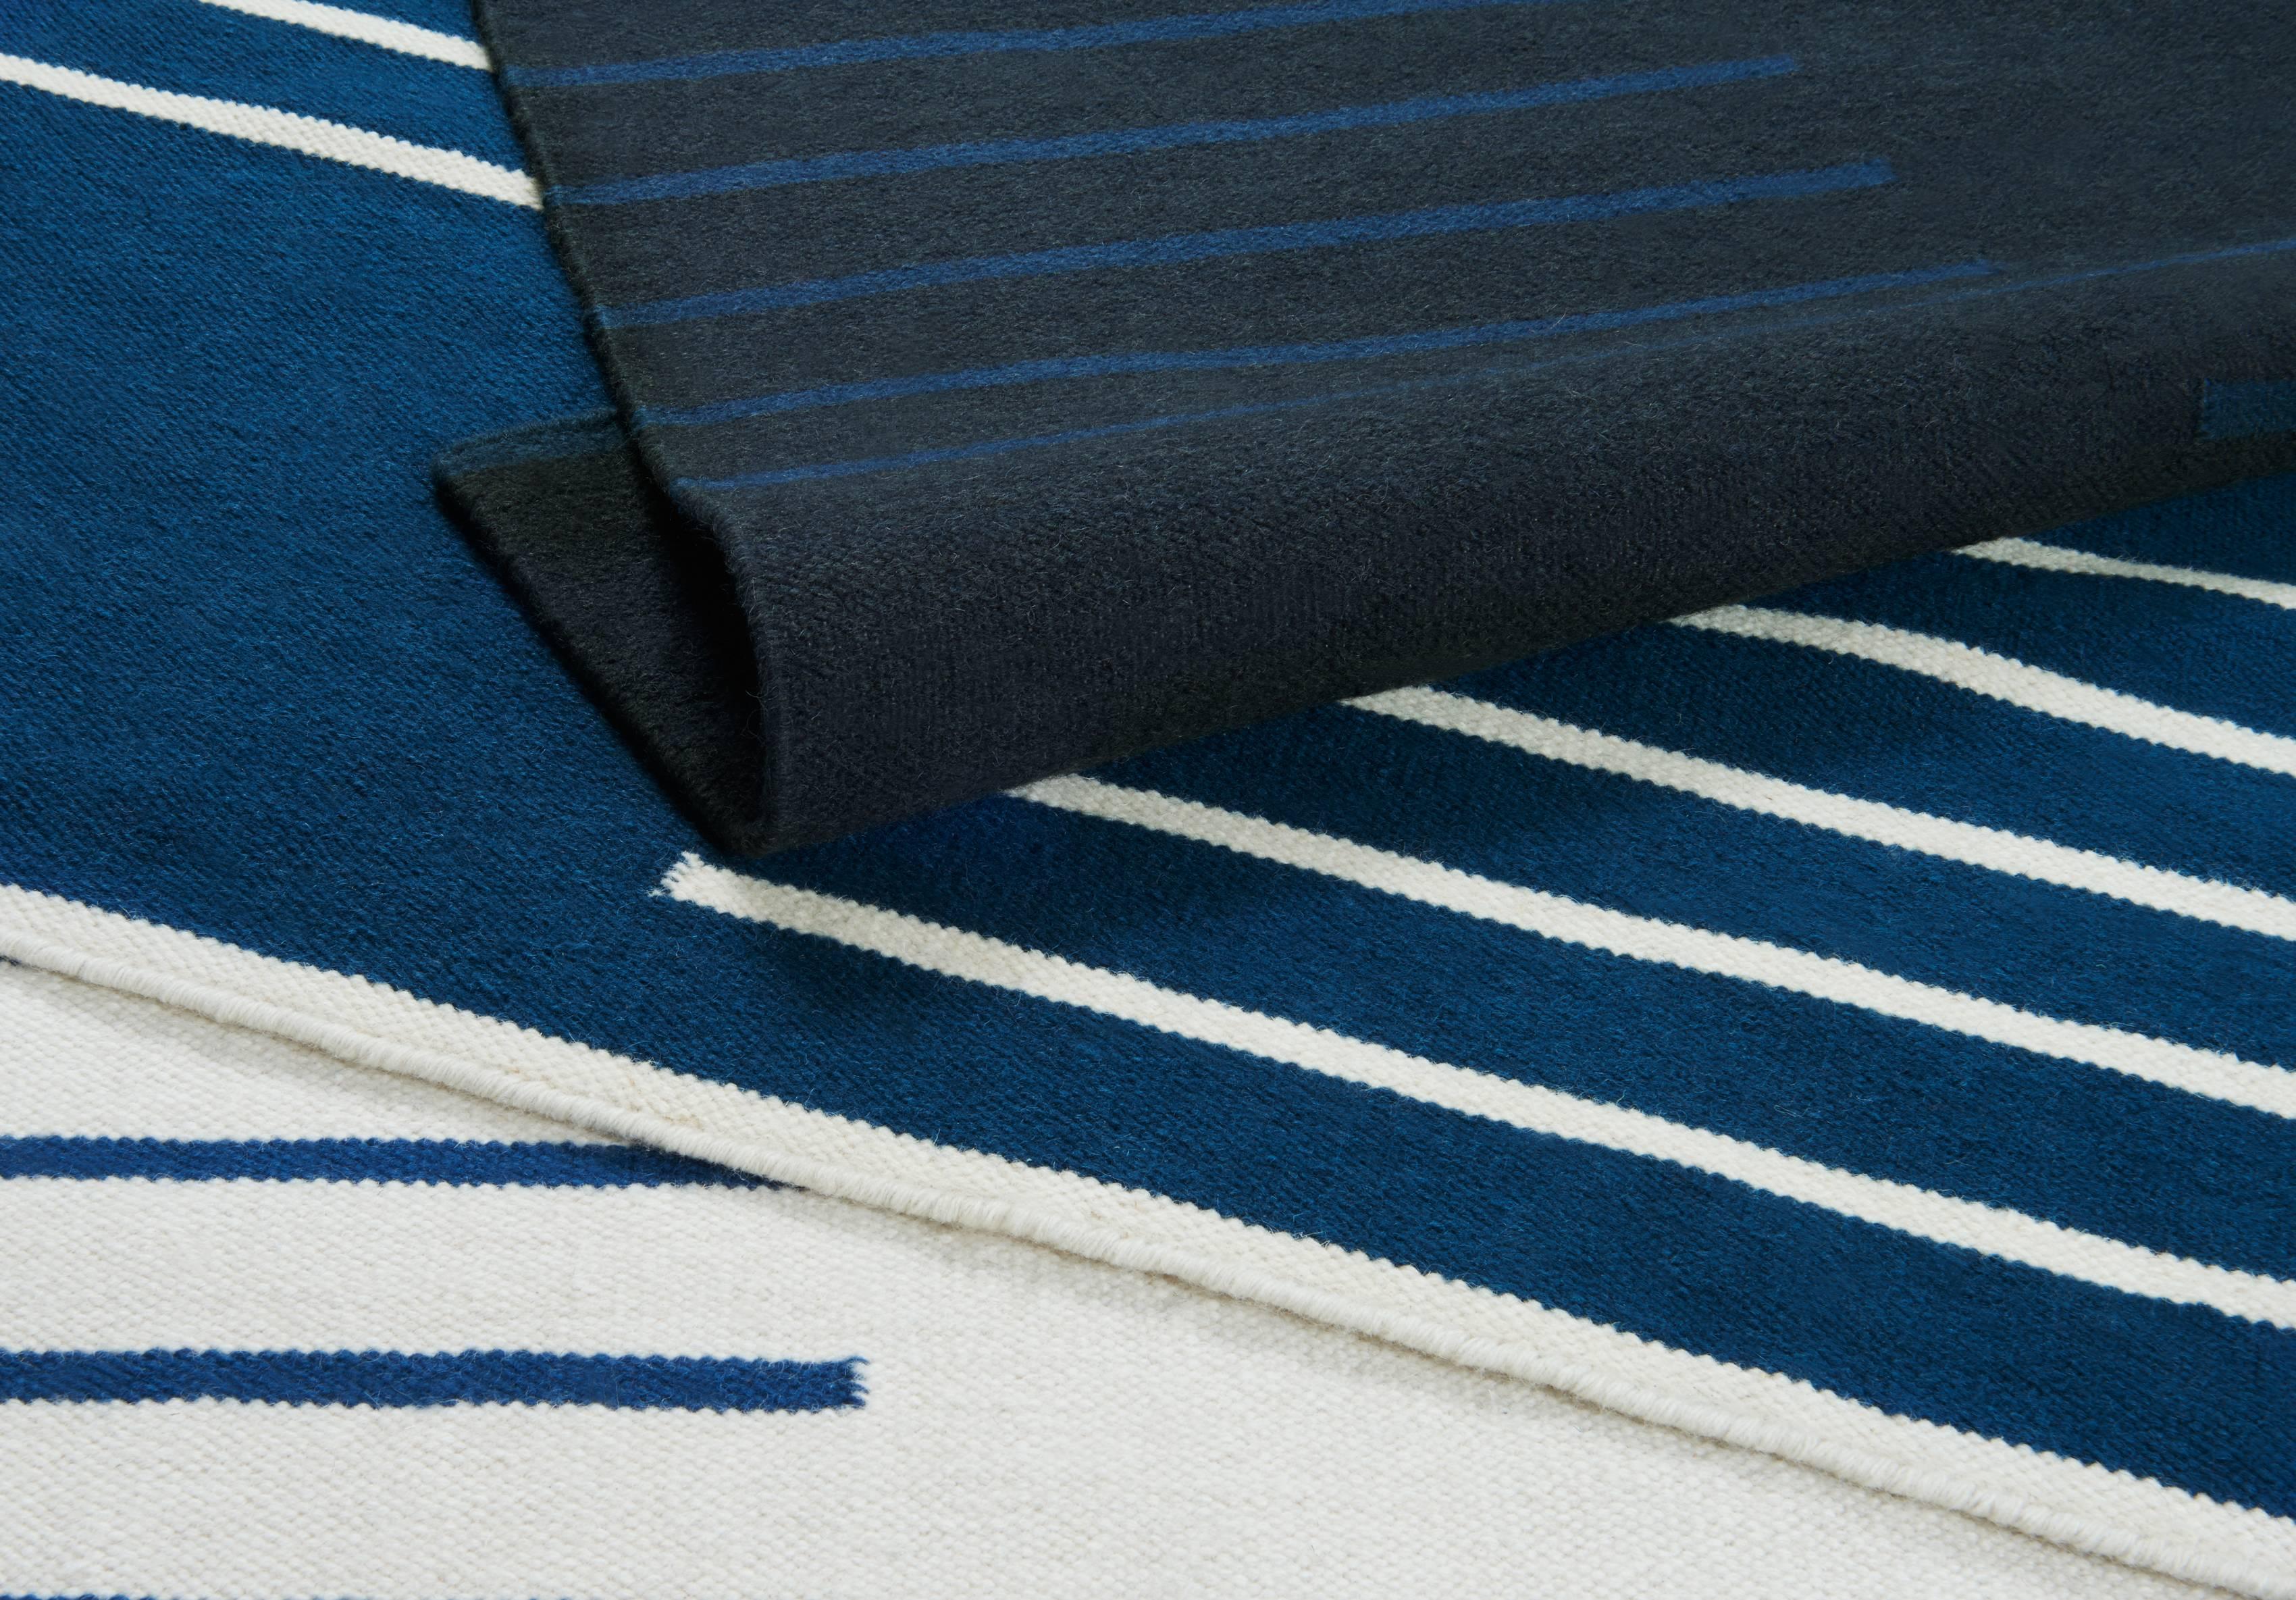 Classic Cream/Blue is a modern dhurrie/kilim rug in Scandinavian design. It is available in different sizes - see customization options below.

A traditional design inspired by classic Scandinavian patterns. The rug is available in contrasting